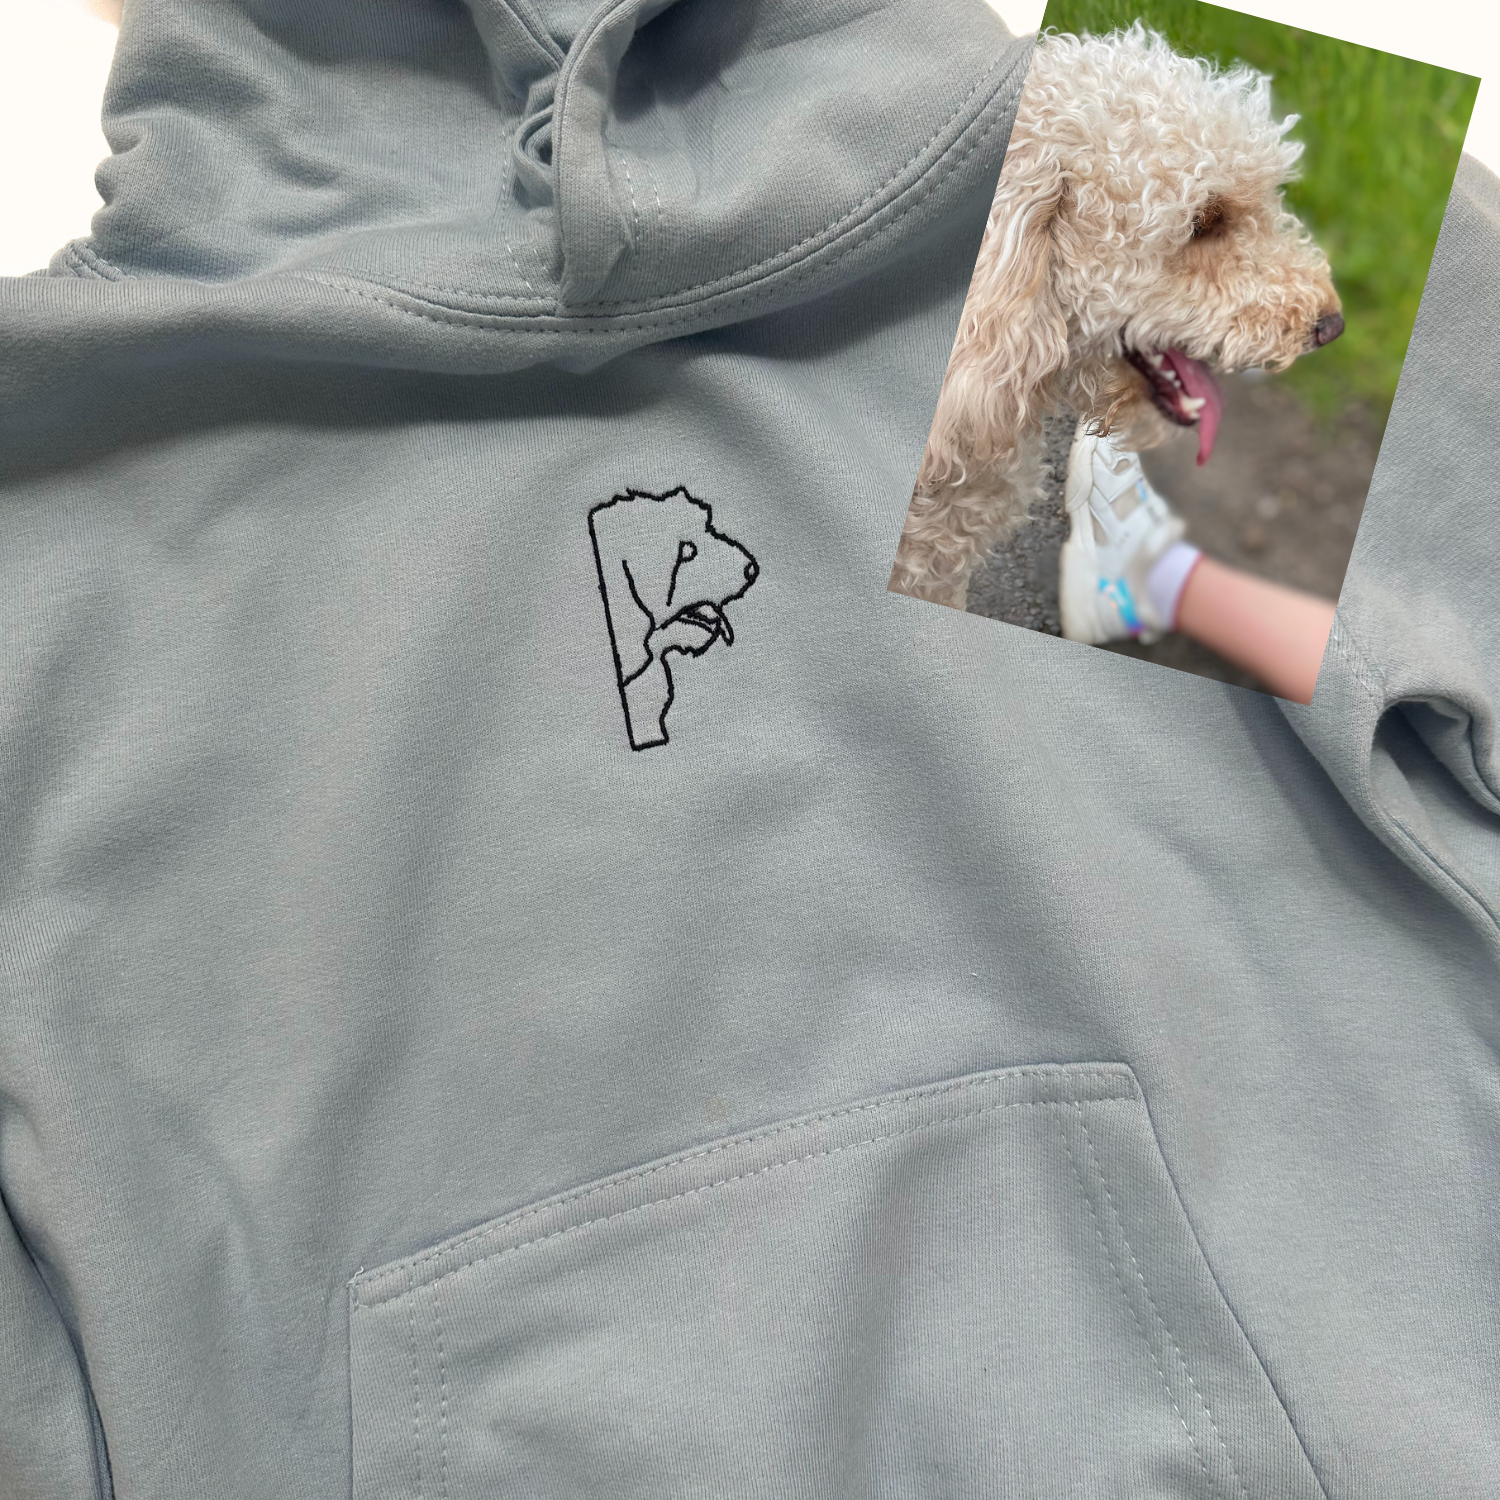 Personalised kids' hoodie featuring an embroidered outline artwork of a customer's submitted image. The image is transformed into a unique, custom design that is stitched onto the hoodie, making it a one-of-a-kind piece